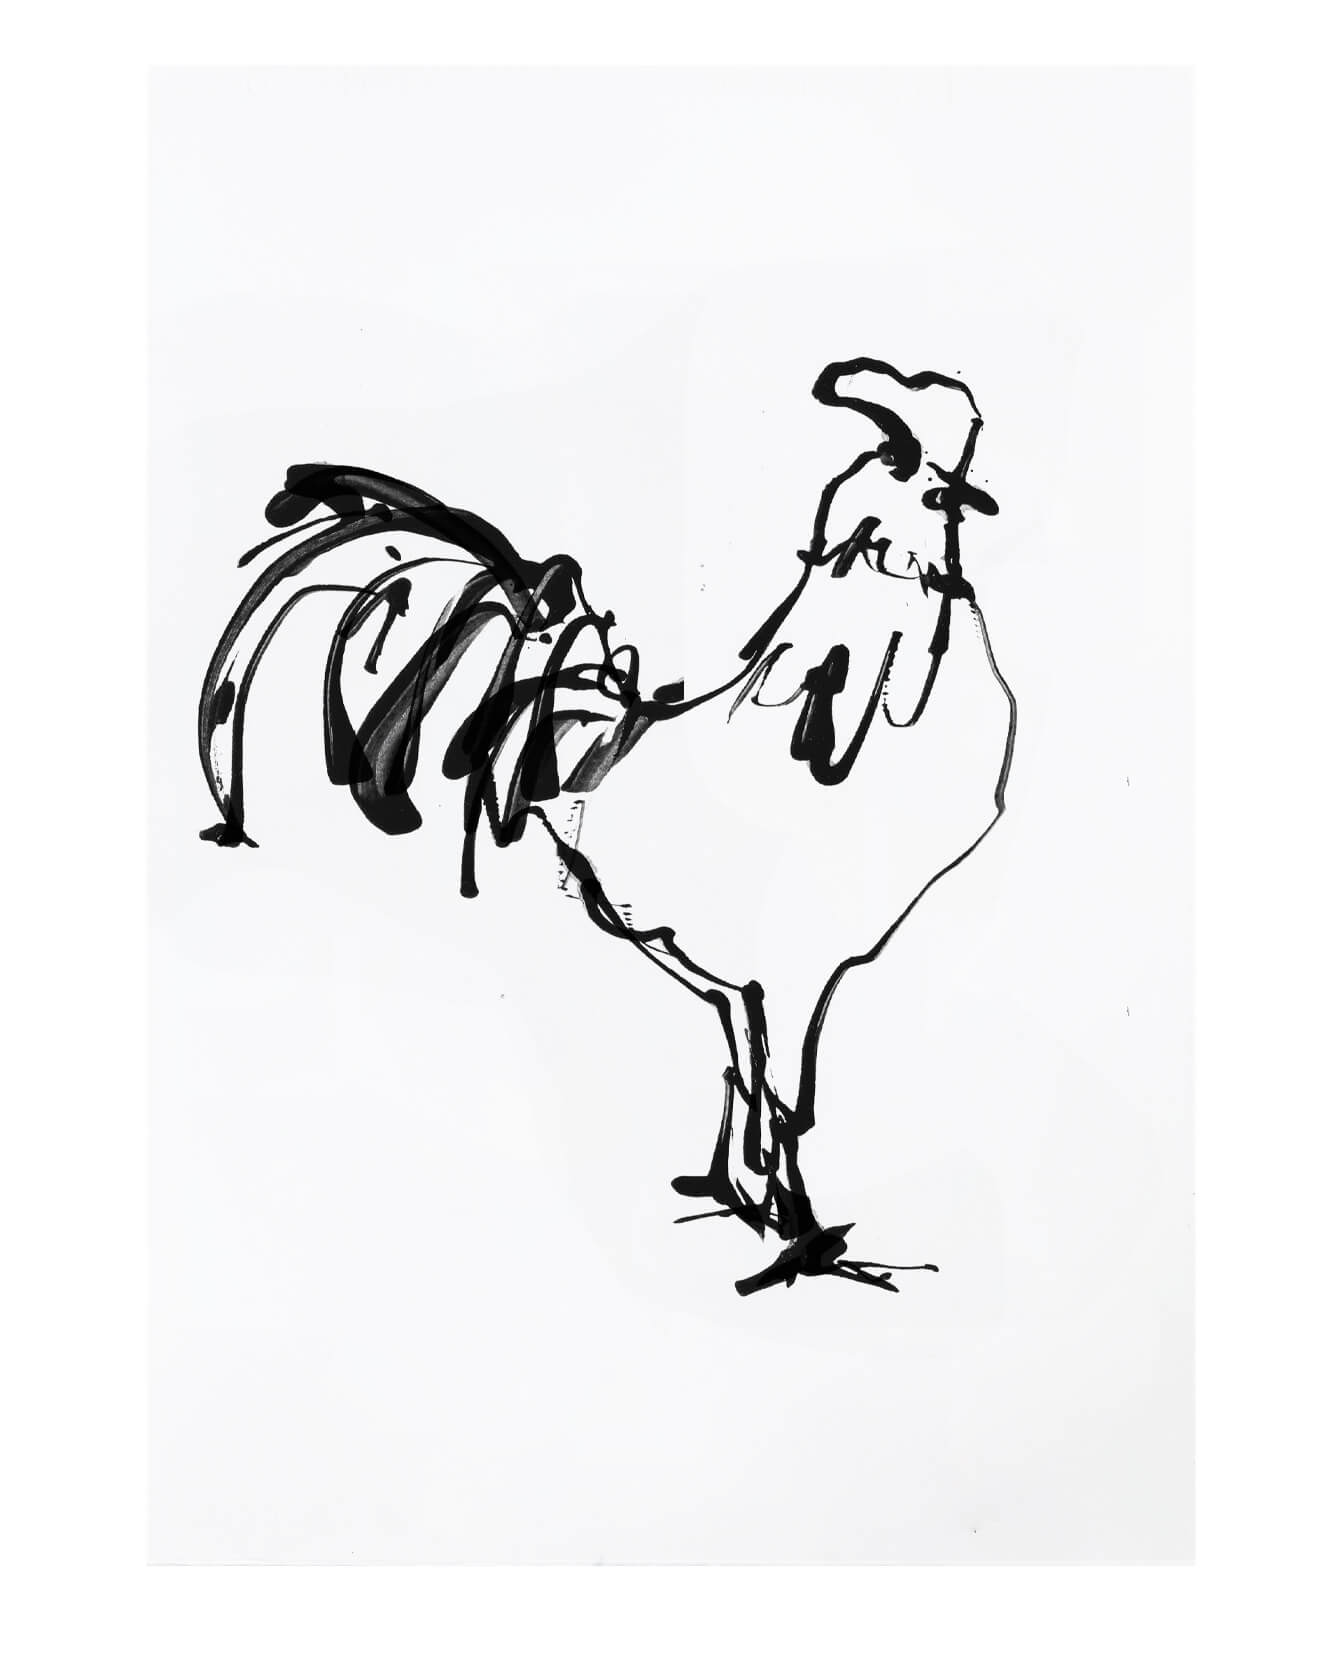 An artists sketchbook of line drawings inspired  by an opportunity to capture UK food produce from all regions of the Uk. From sketch to full colour illustrations. Drawings of cows and chickens.